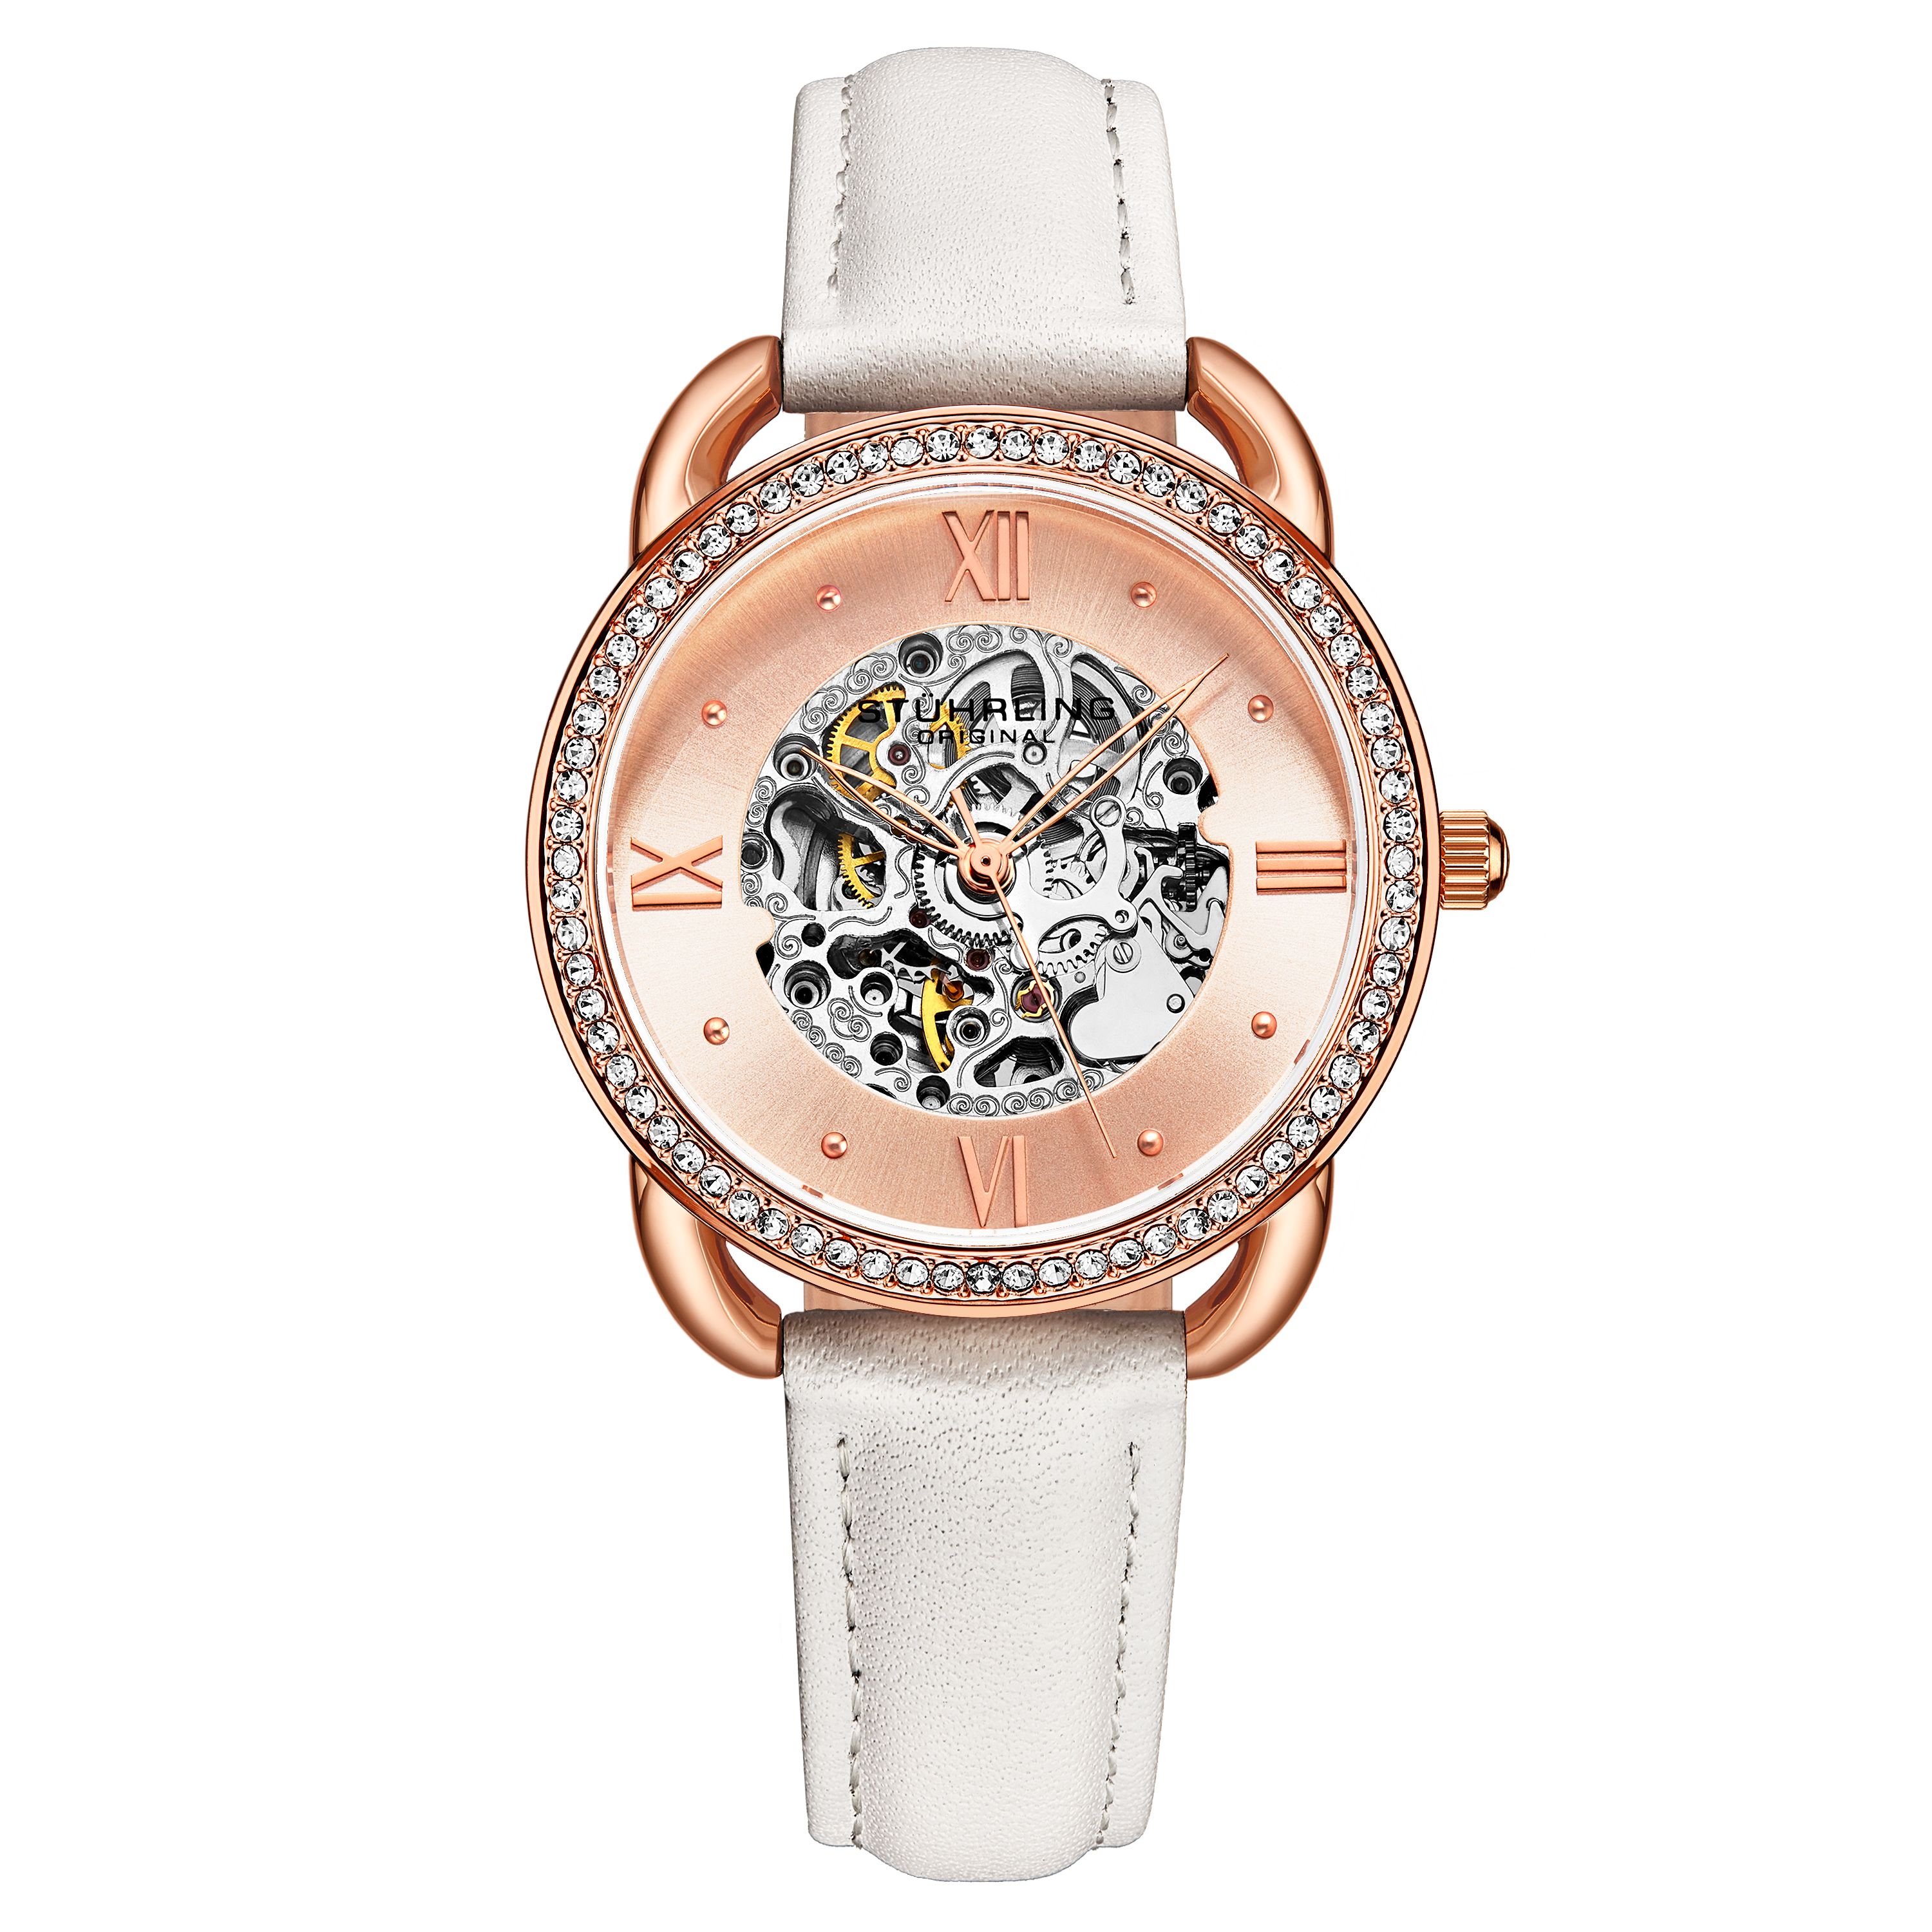 Ladies Automatic Rose/Gold Toned Case, Rose/Gold Toned Crystal Studded Bezel, Rose/Gold Toned Dial, Rose/Gold Hands and Markers, White Genuine Leather Strap Watch